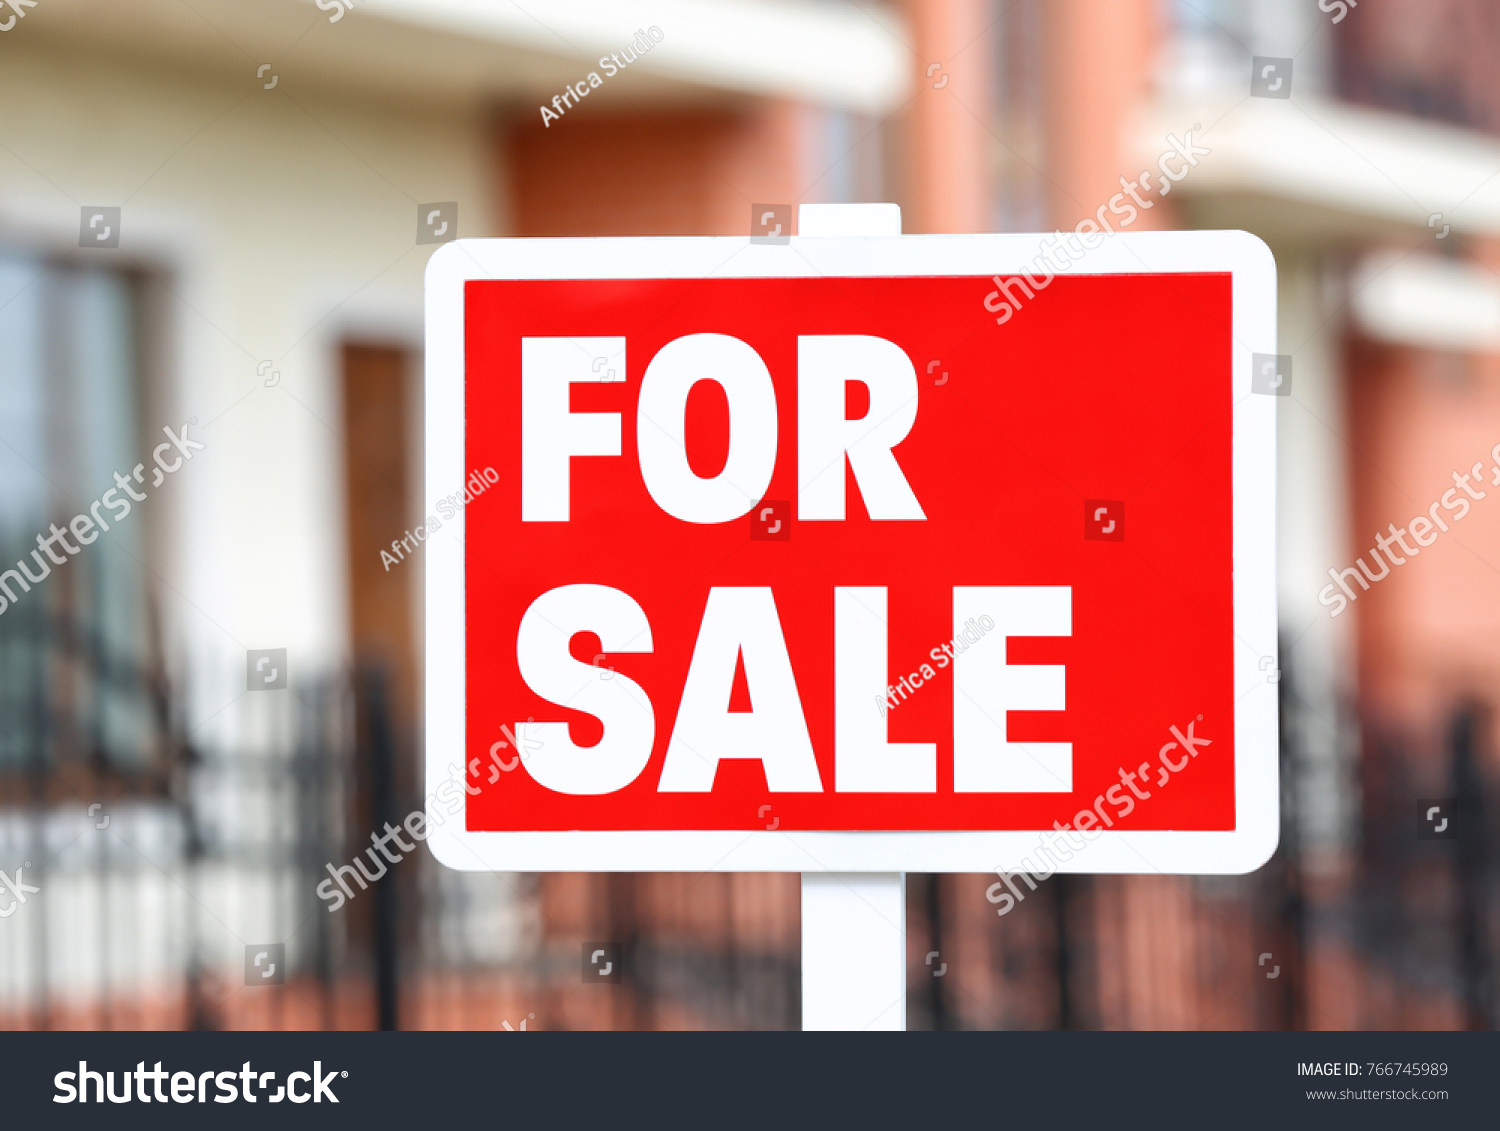 "For sale" sign outdoors #766745989